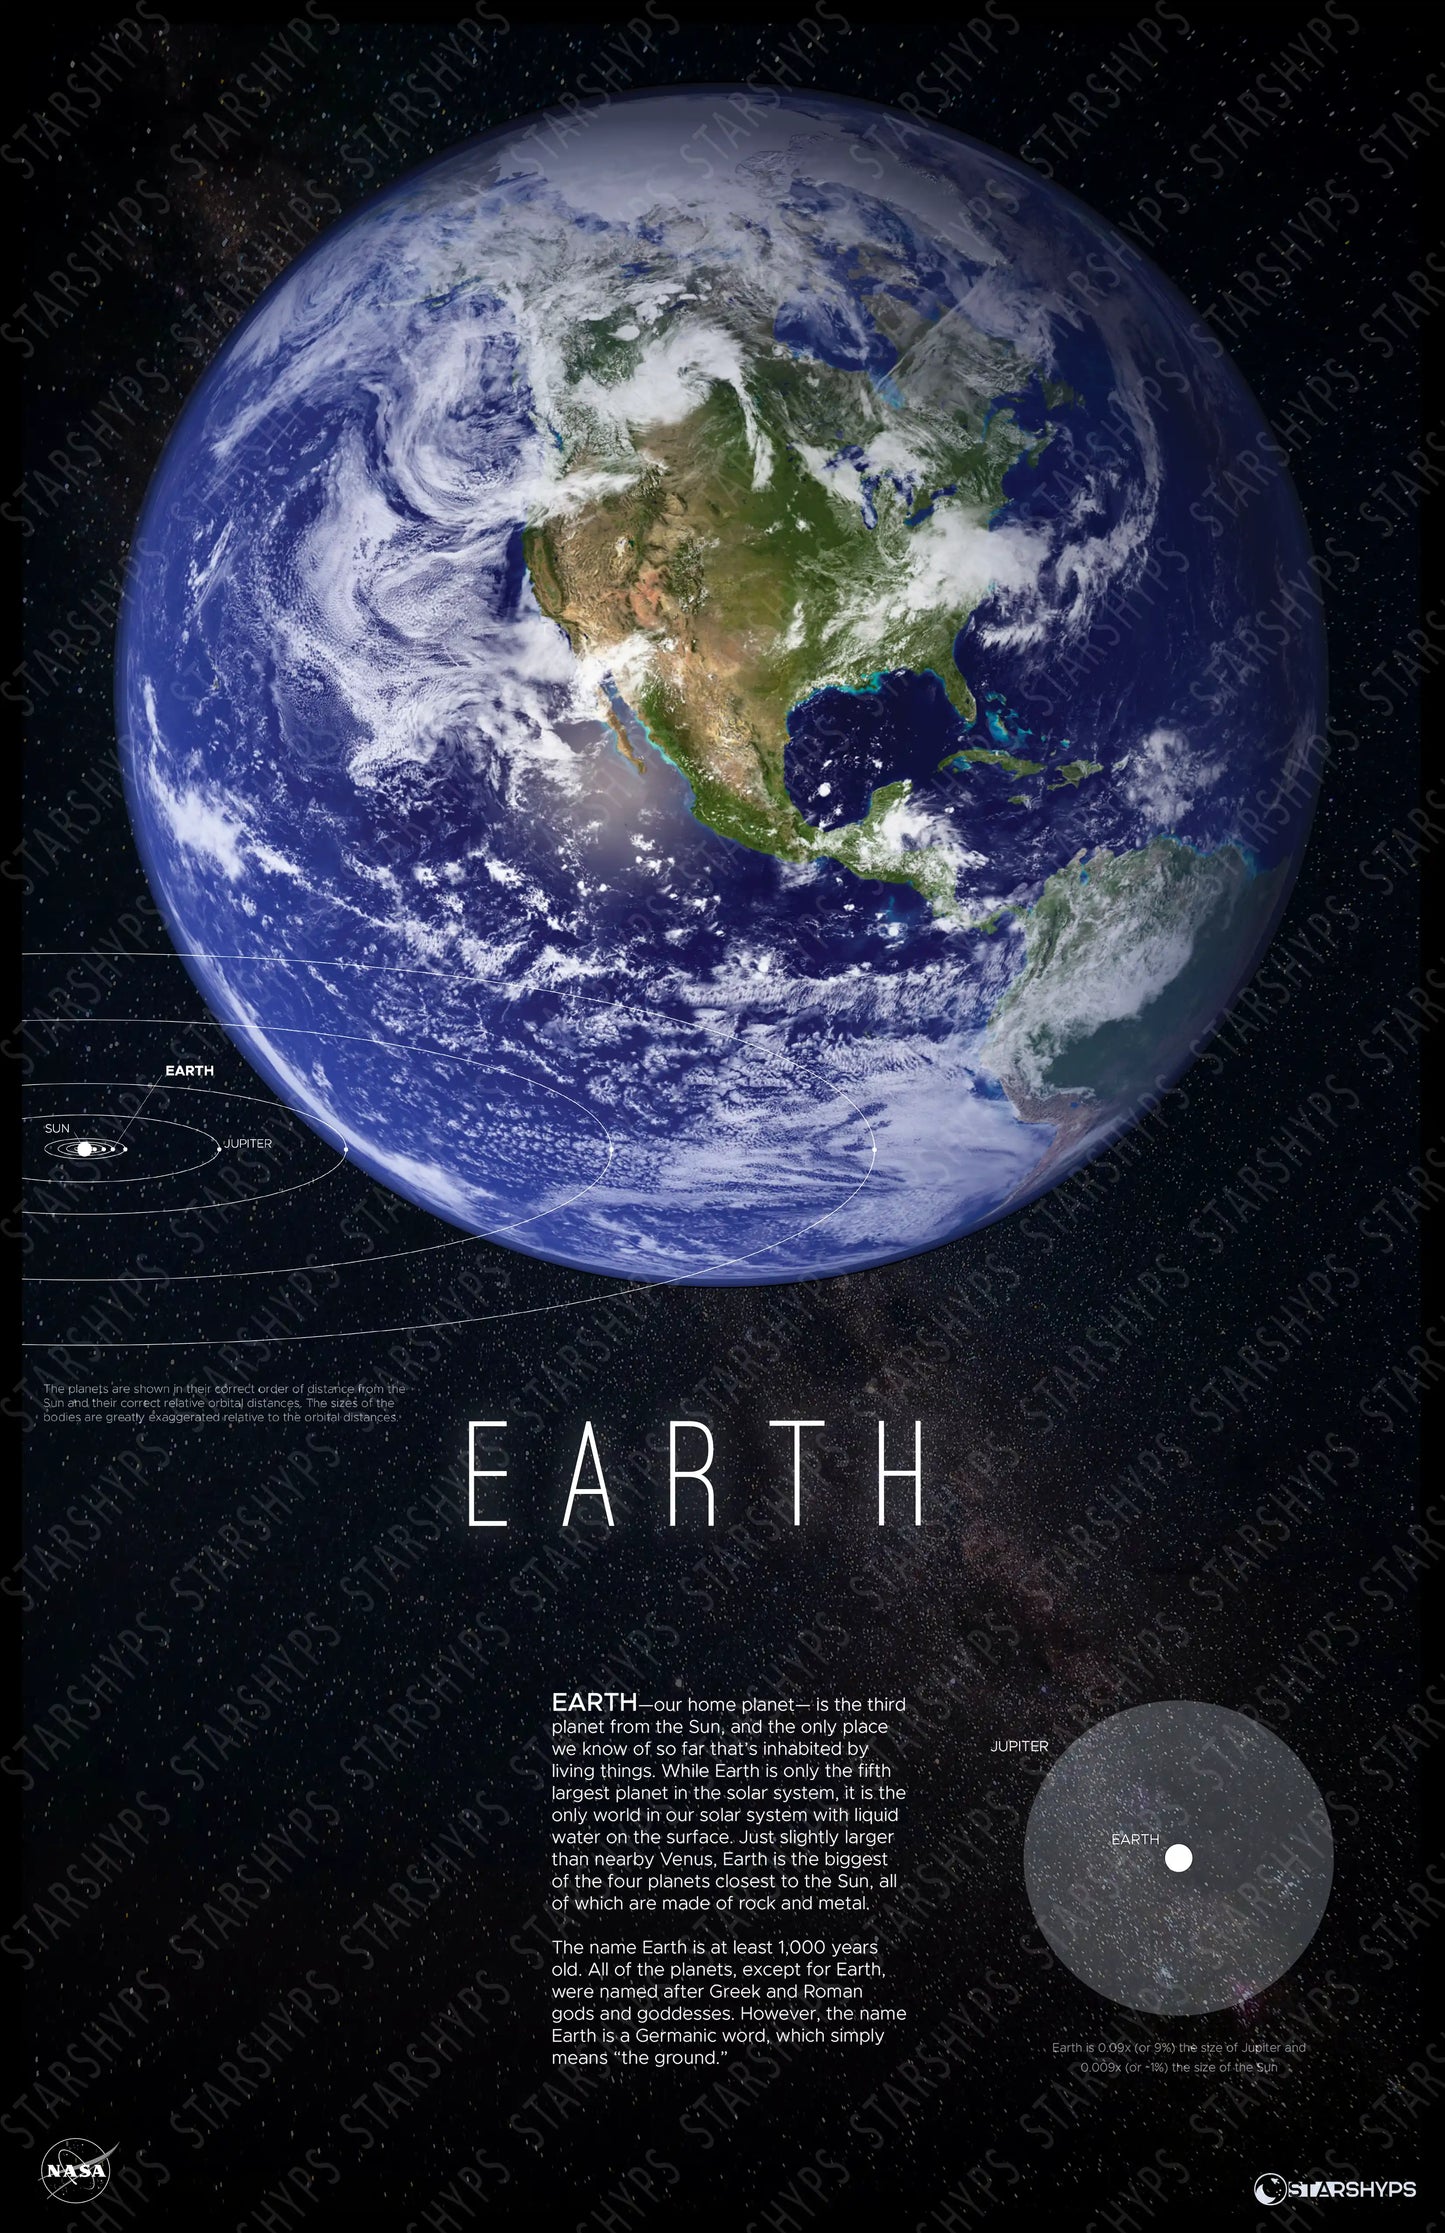 Blue Marble Earth Decor | Blue Earth Print | Rocket Blueprint Posters | A framed poster of Earth, featuring a high-resolution image, the title "EARTH," informative text, and a size comparison diagram with Jupiter. The poster includes an orbit diagram, with the Starshyps watermark visible, set against a backdrop of stars.